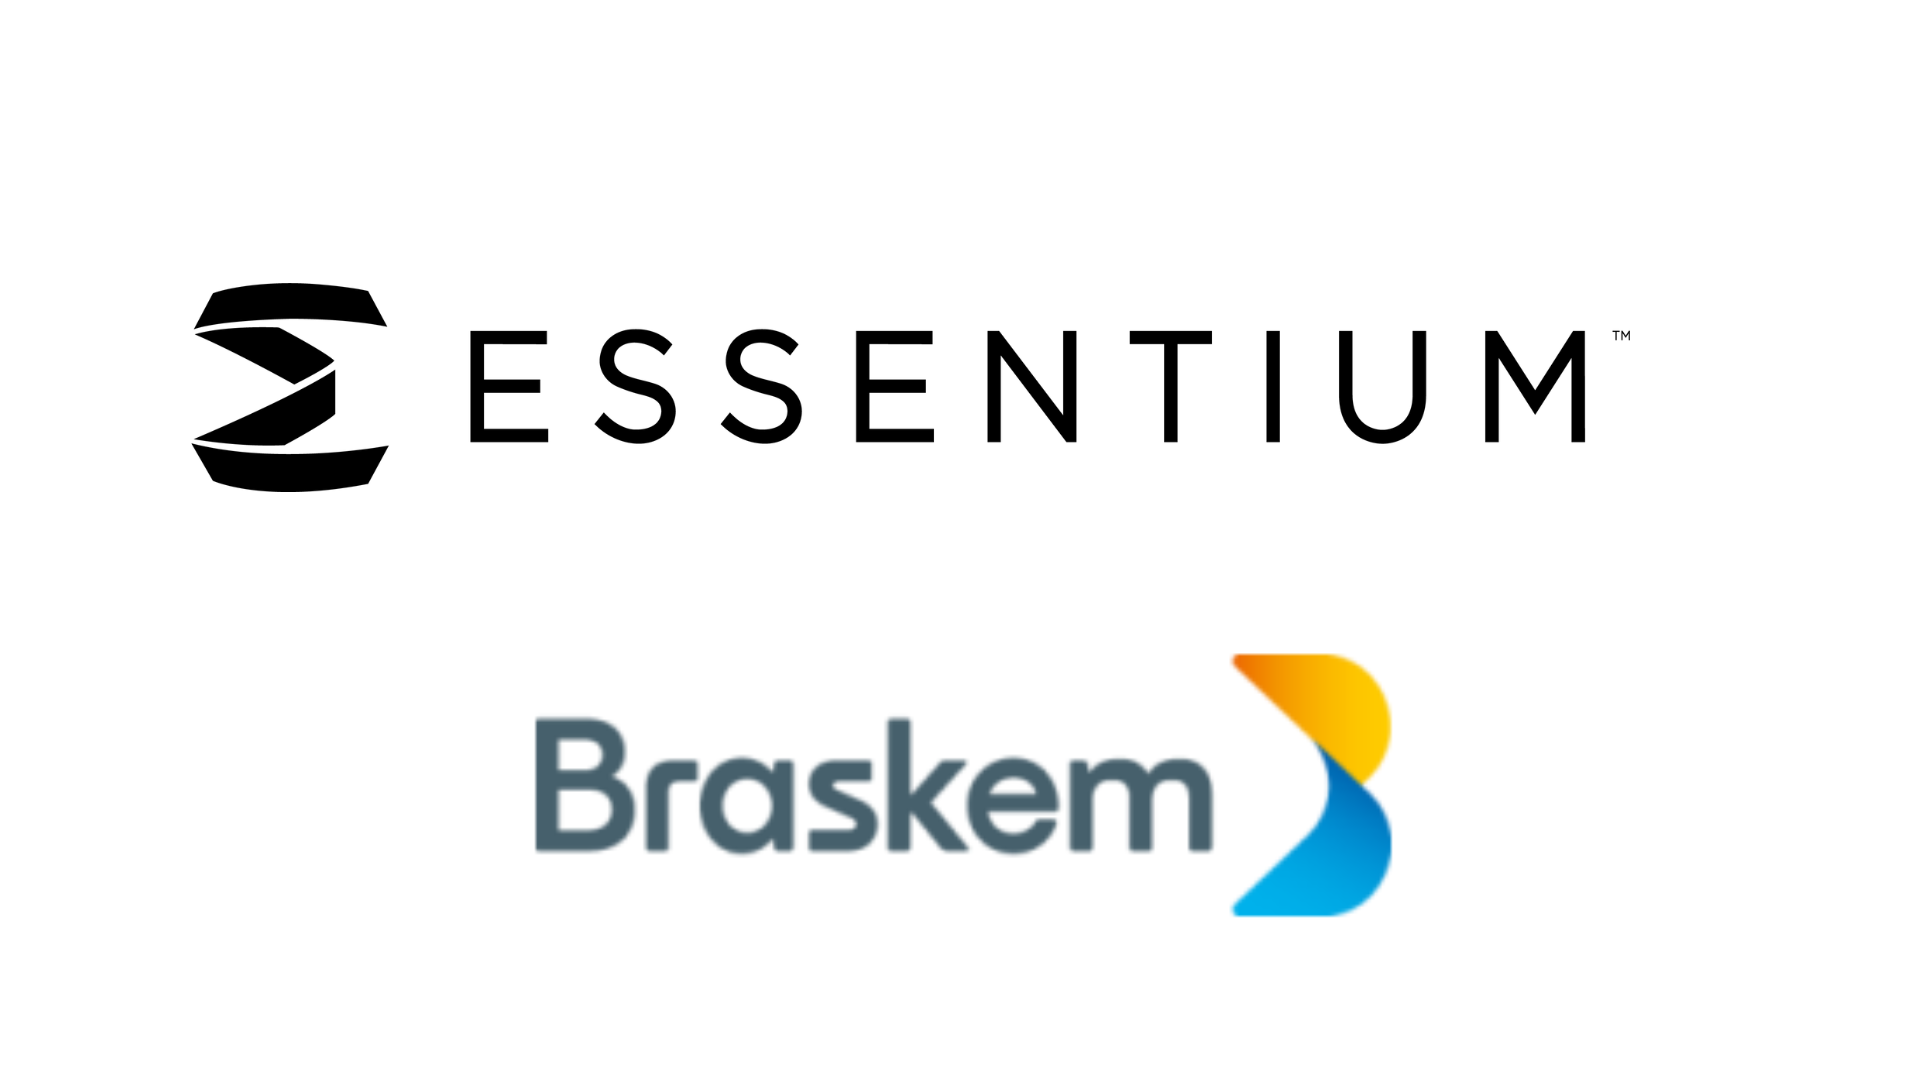 Combining the Essentium 3D Printer with Braskem's polyolefin materials for affordable, sustainable, and volume production of thermoplastic components.